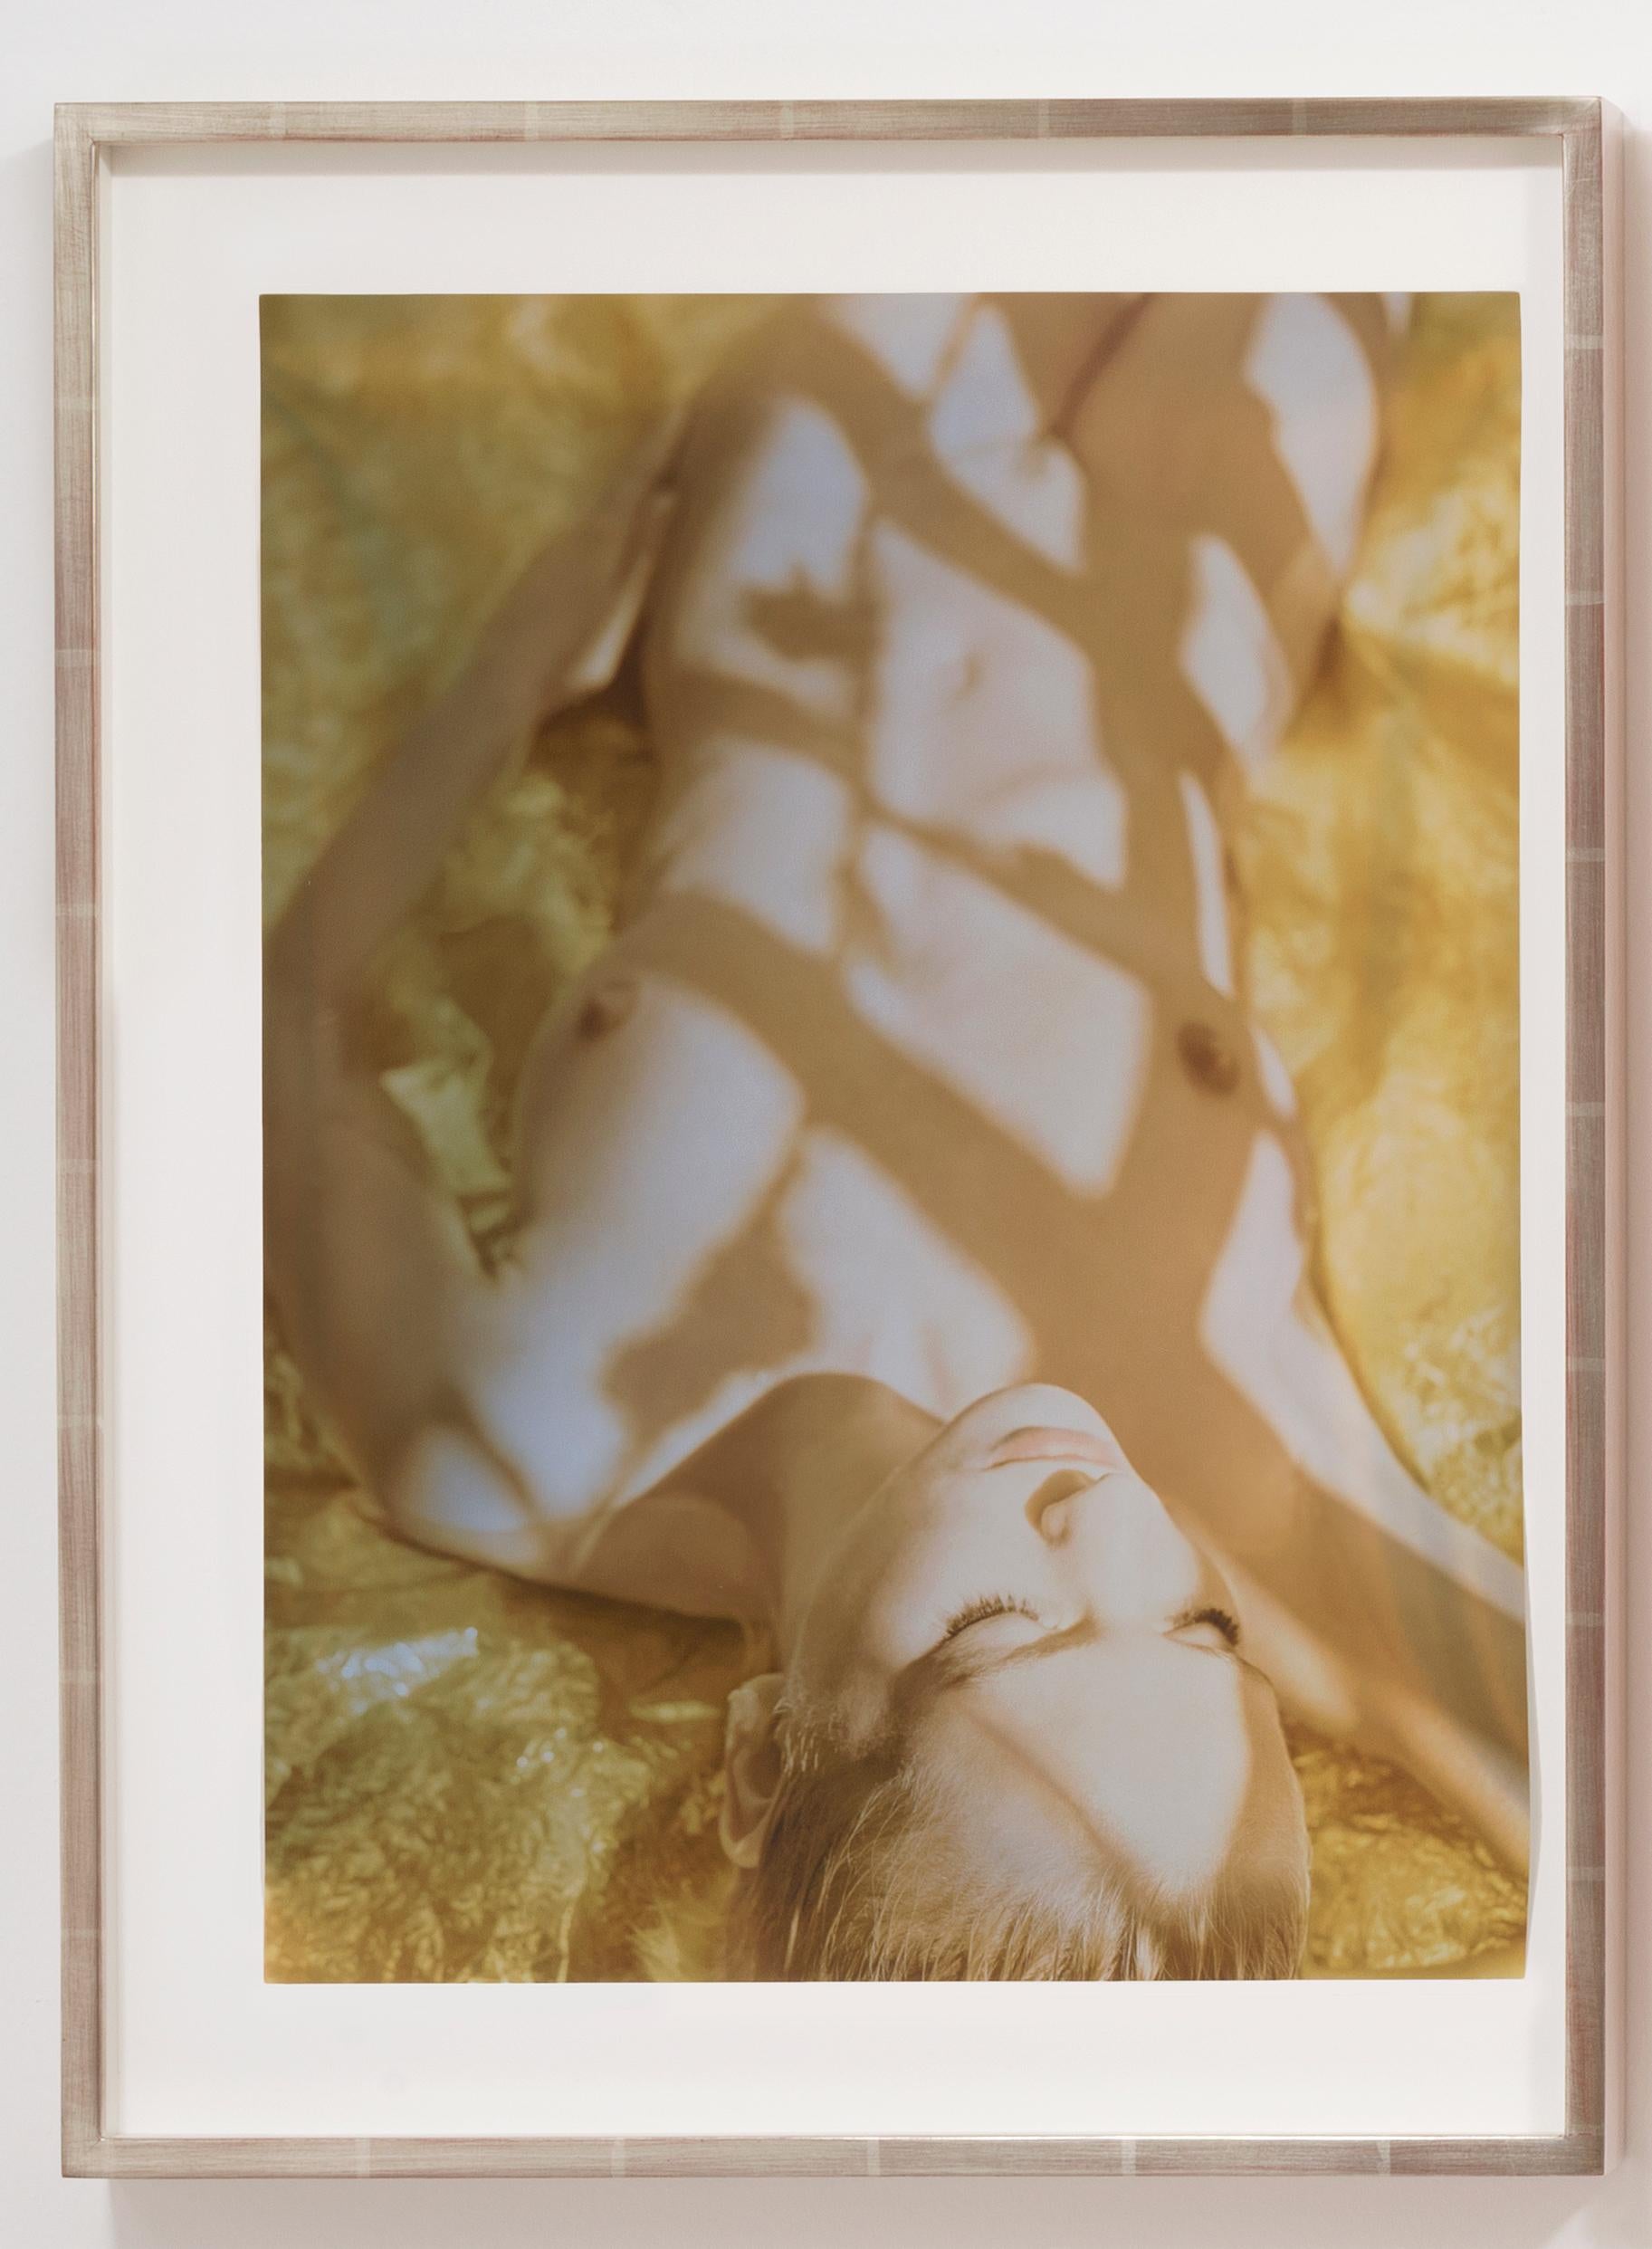 Mona Kuhn, Acido Dorado: Illusions, 2014 was photographed at architect Robert Stone's secluded glass house located in California's Mojave Desert near Joshua Tree. Inspired by the early autumn light and elongated shadows in the desert at the